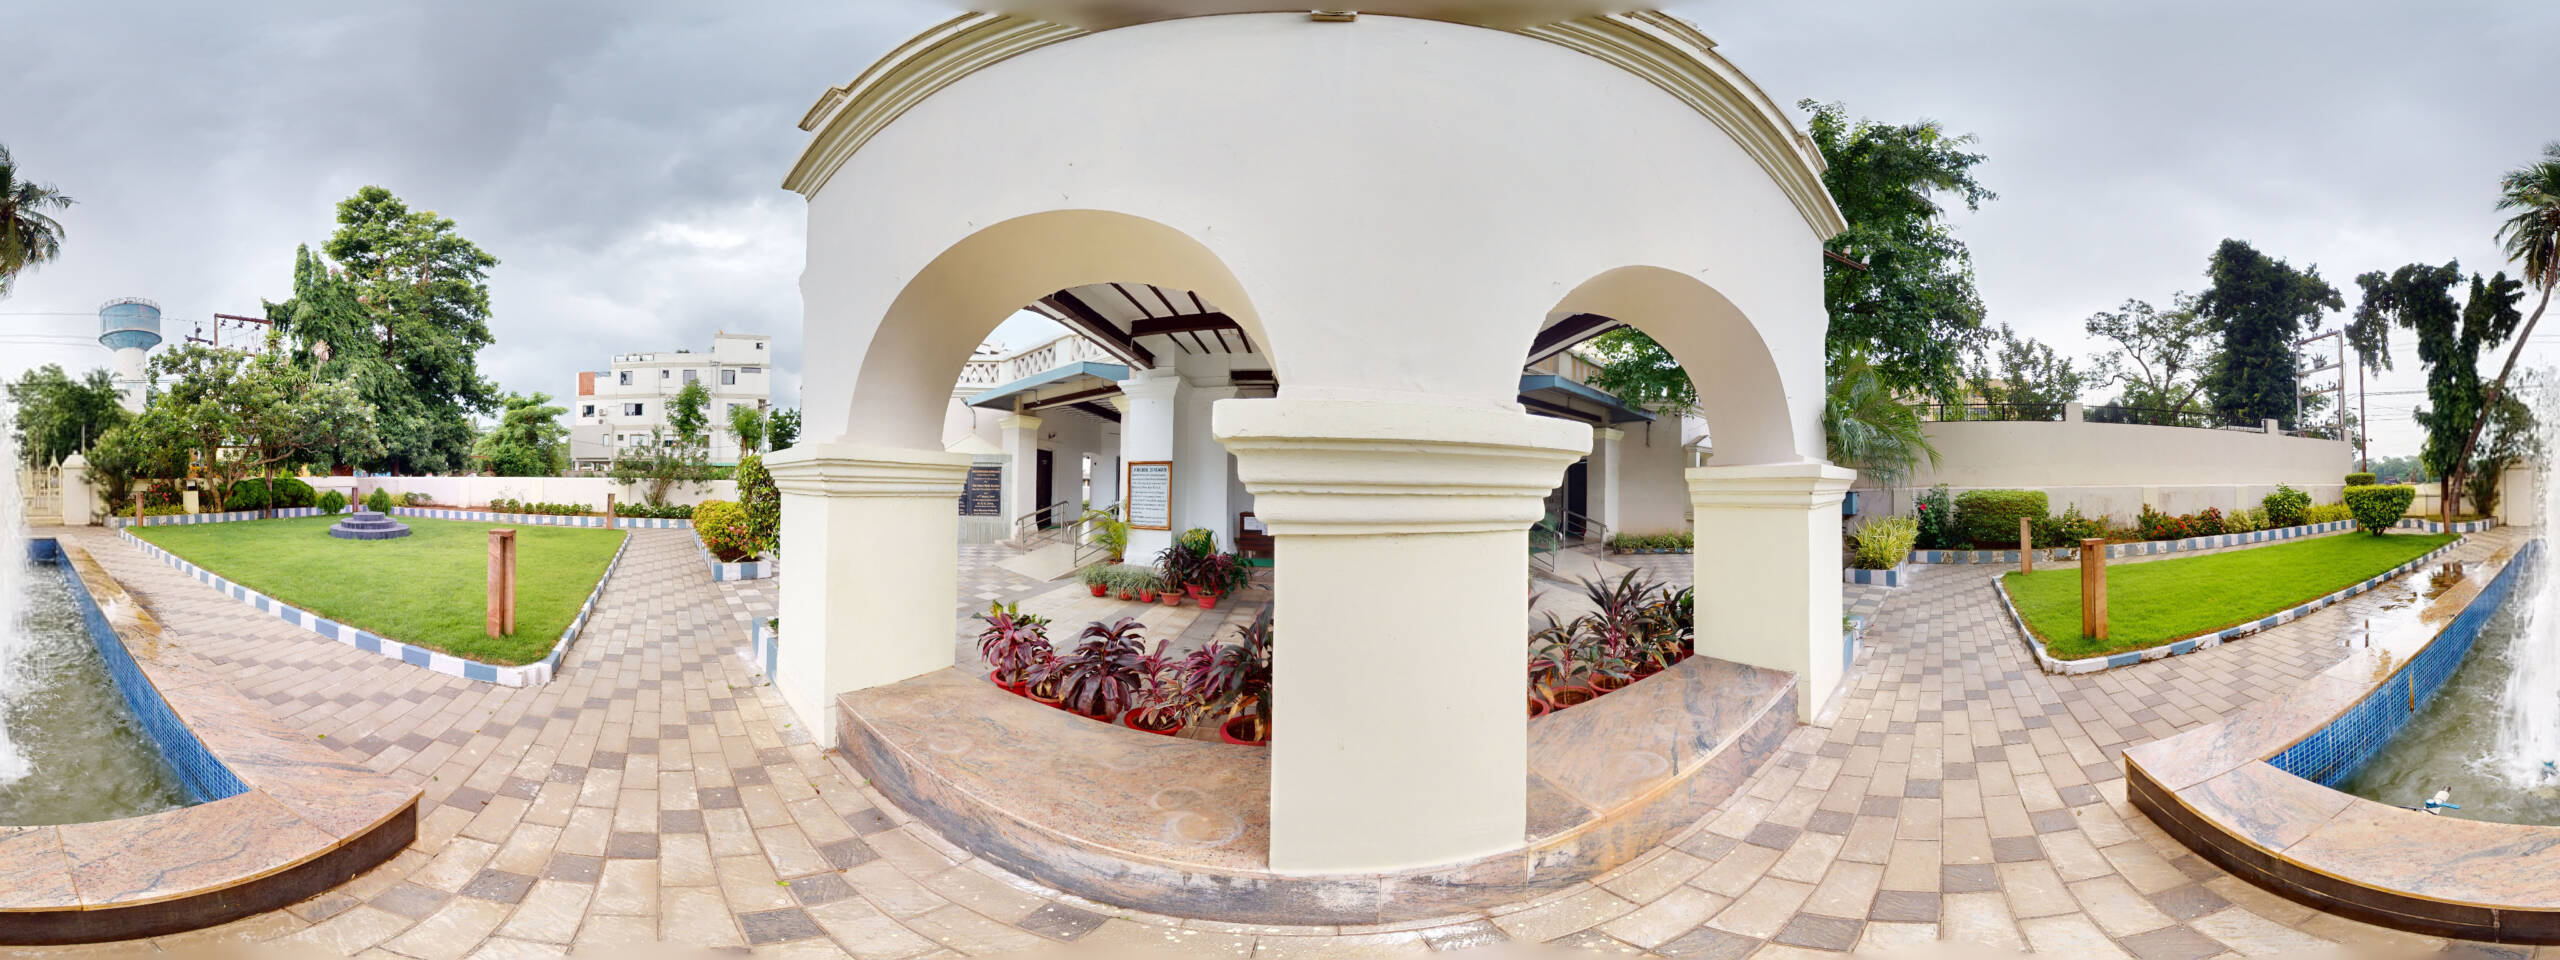 360 degree view of the entrance of Anand Bhawan